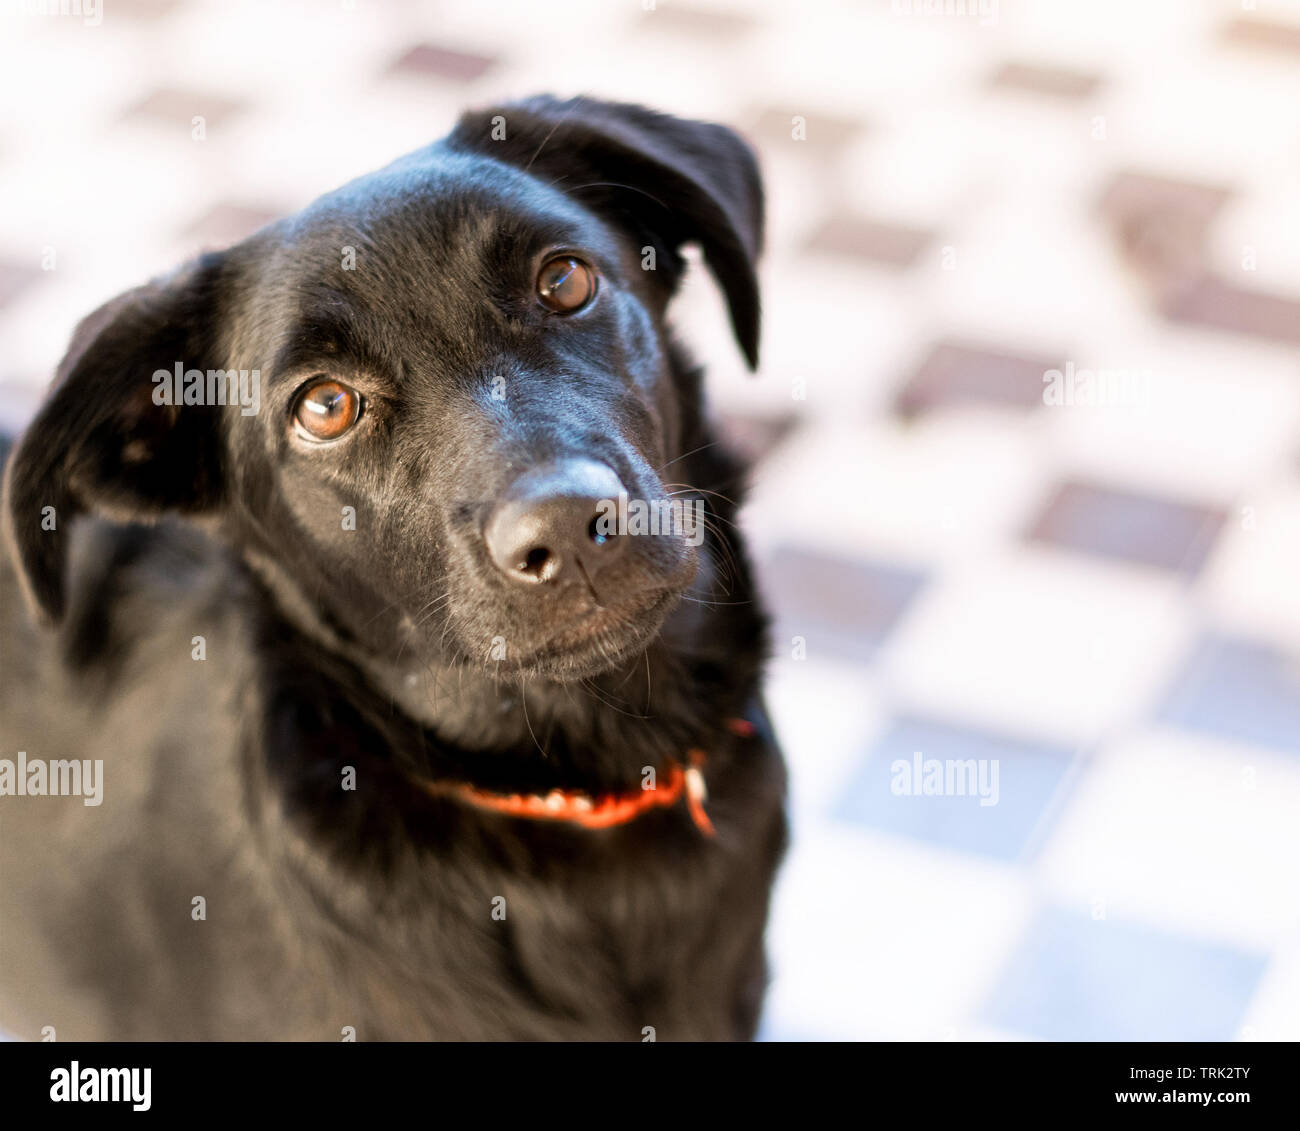 Cute and playful black dog labrador closeup face showing nose and eyes Stock Photo